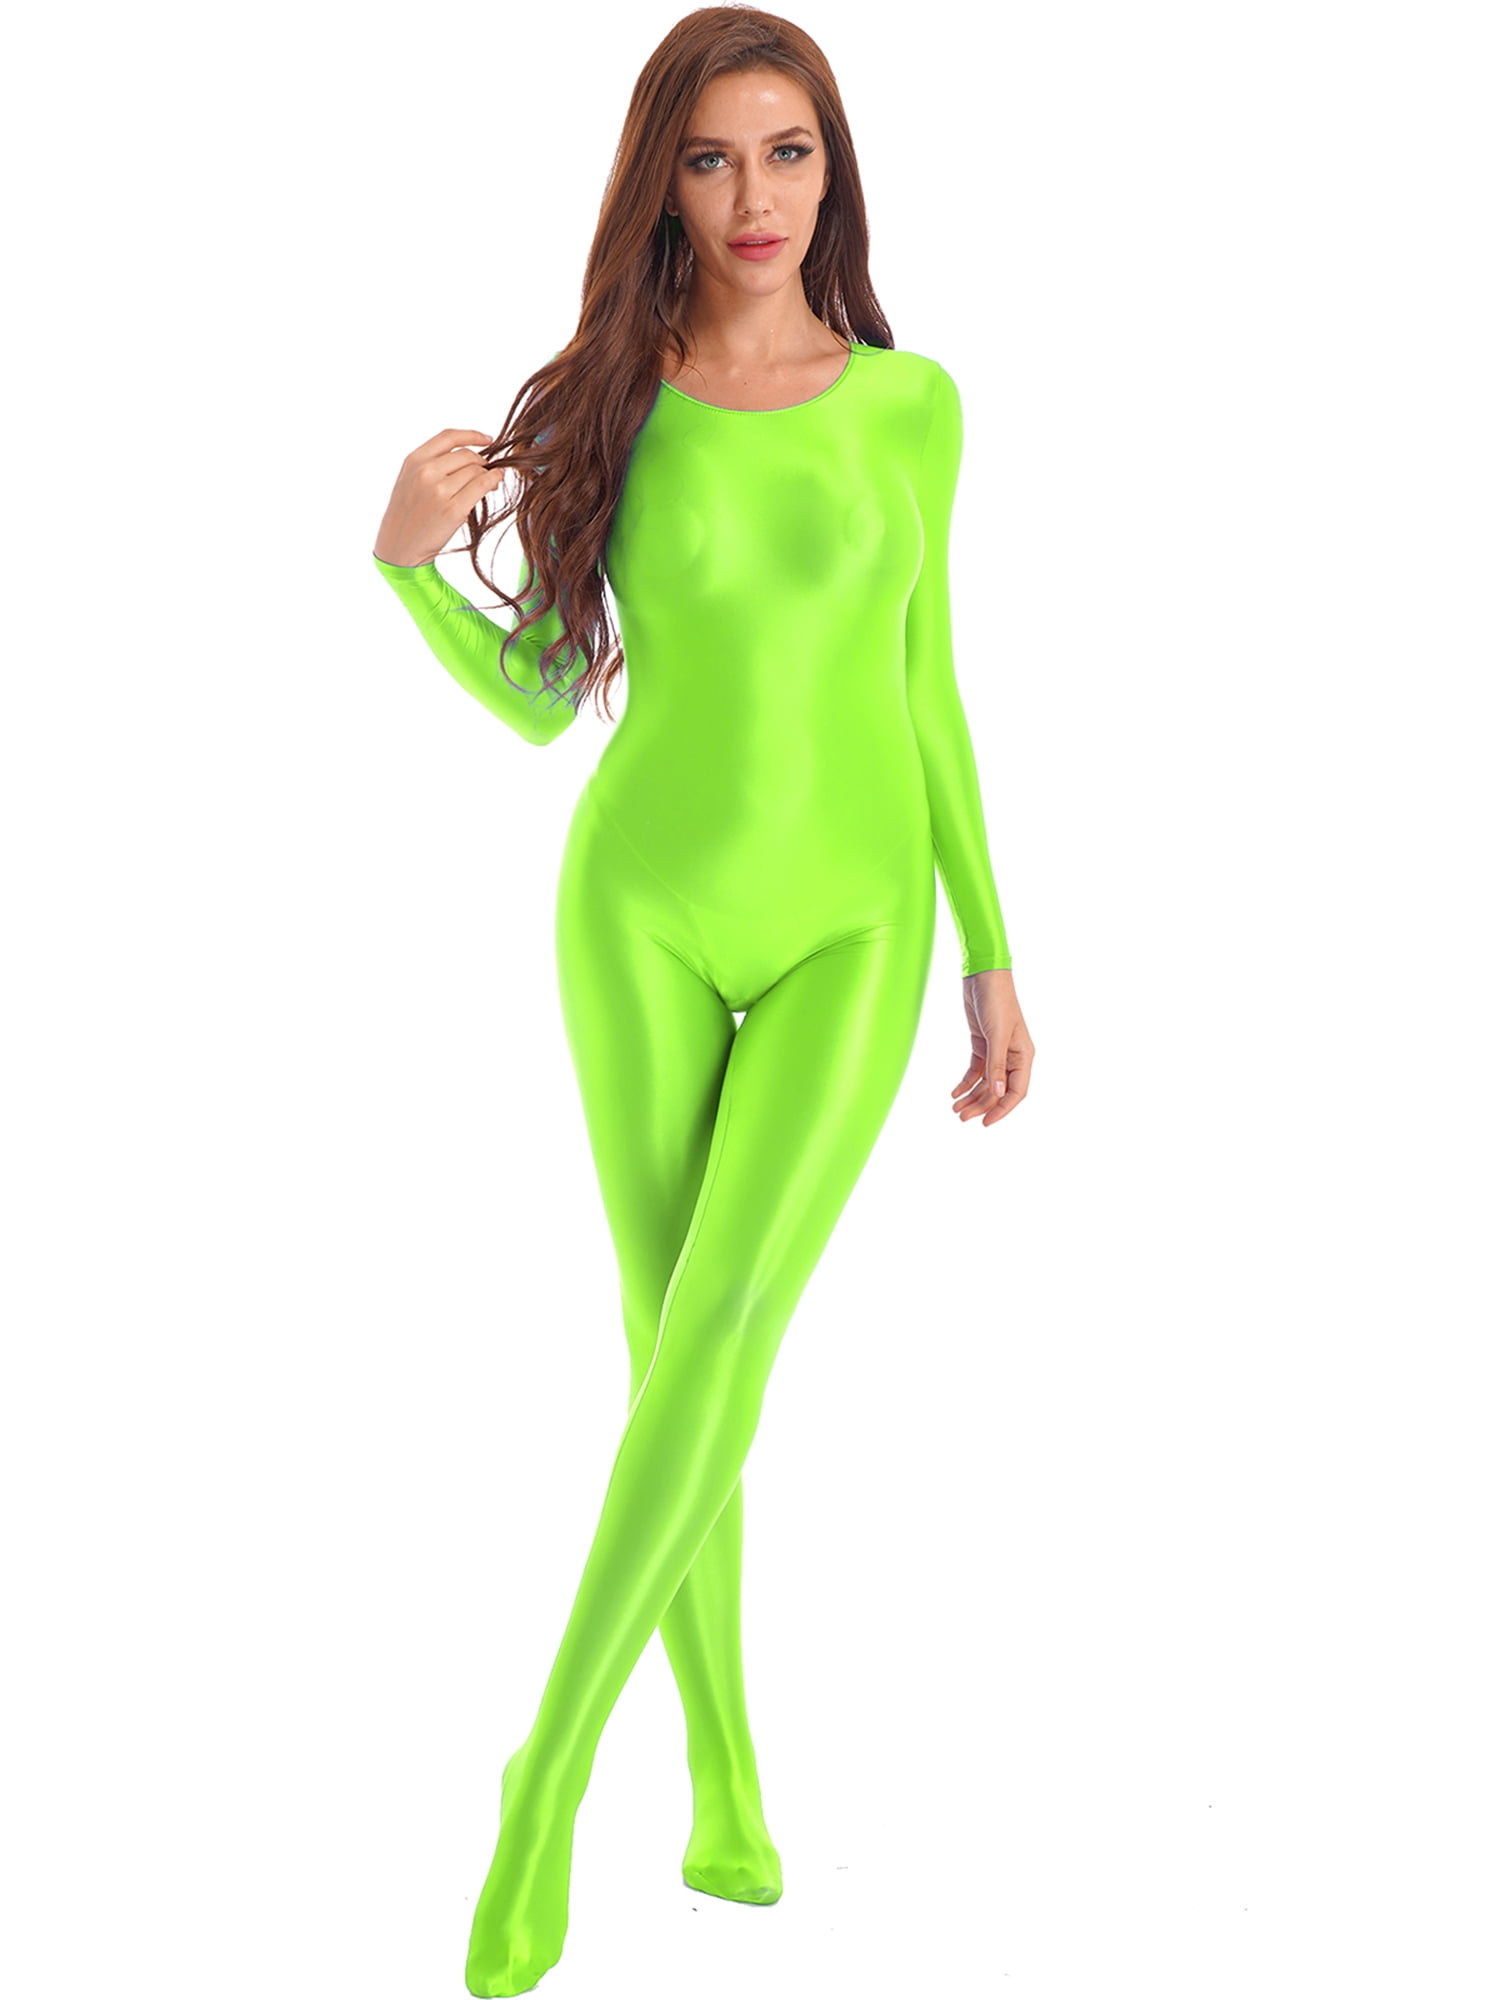 YEAHDOR Womens Full Body Long Sleeve Footed Jumpsuit Silky Shiny